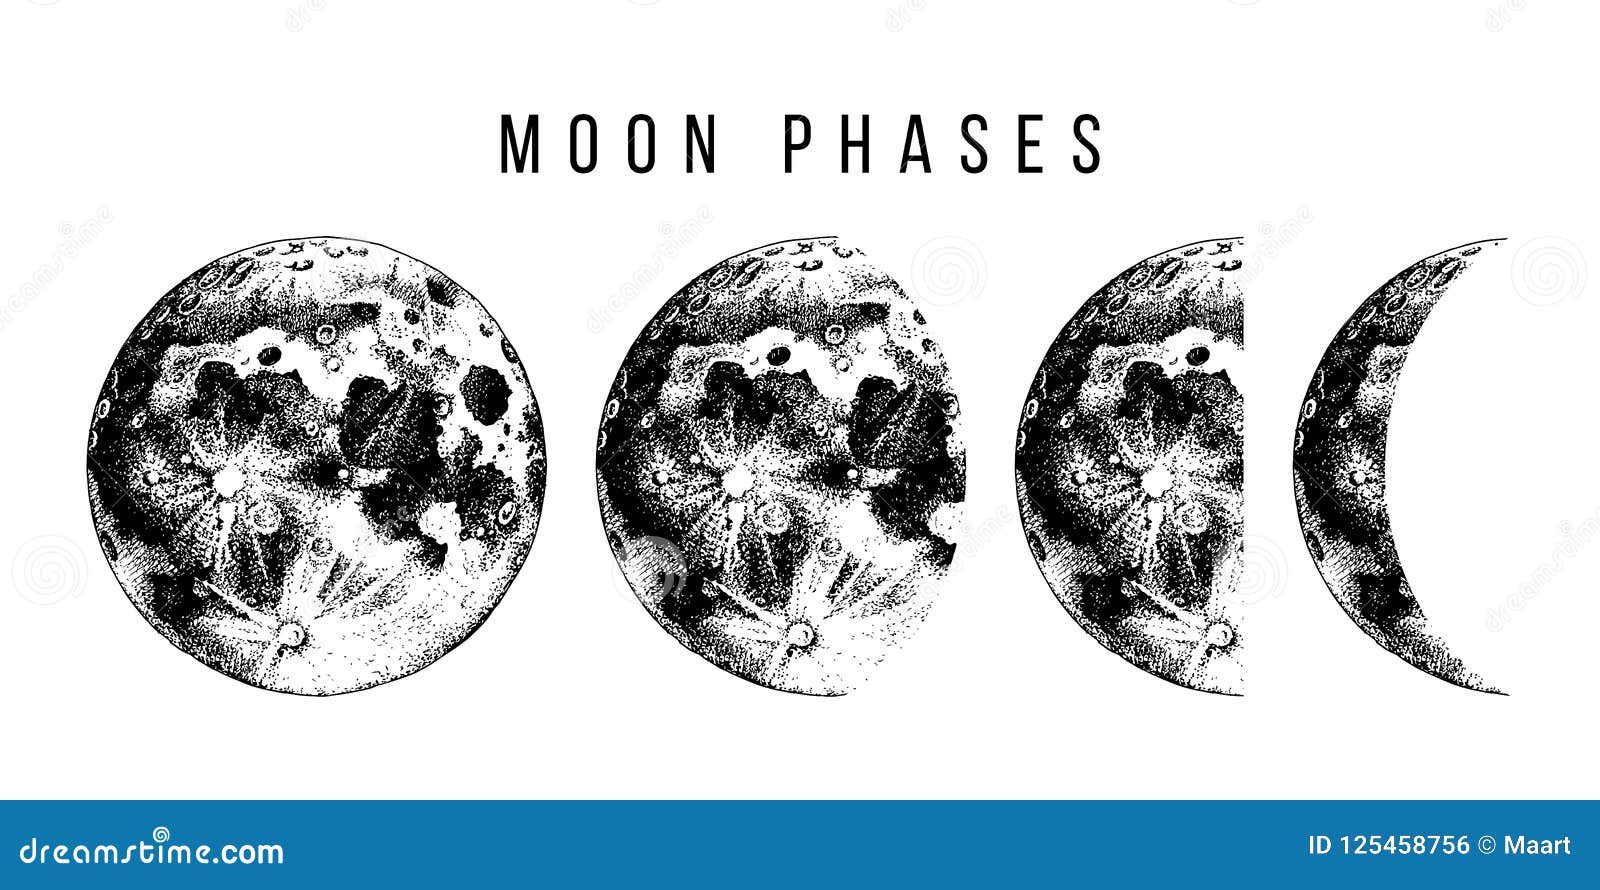 moon phases 